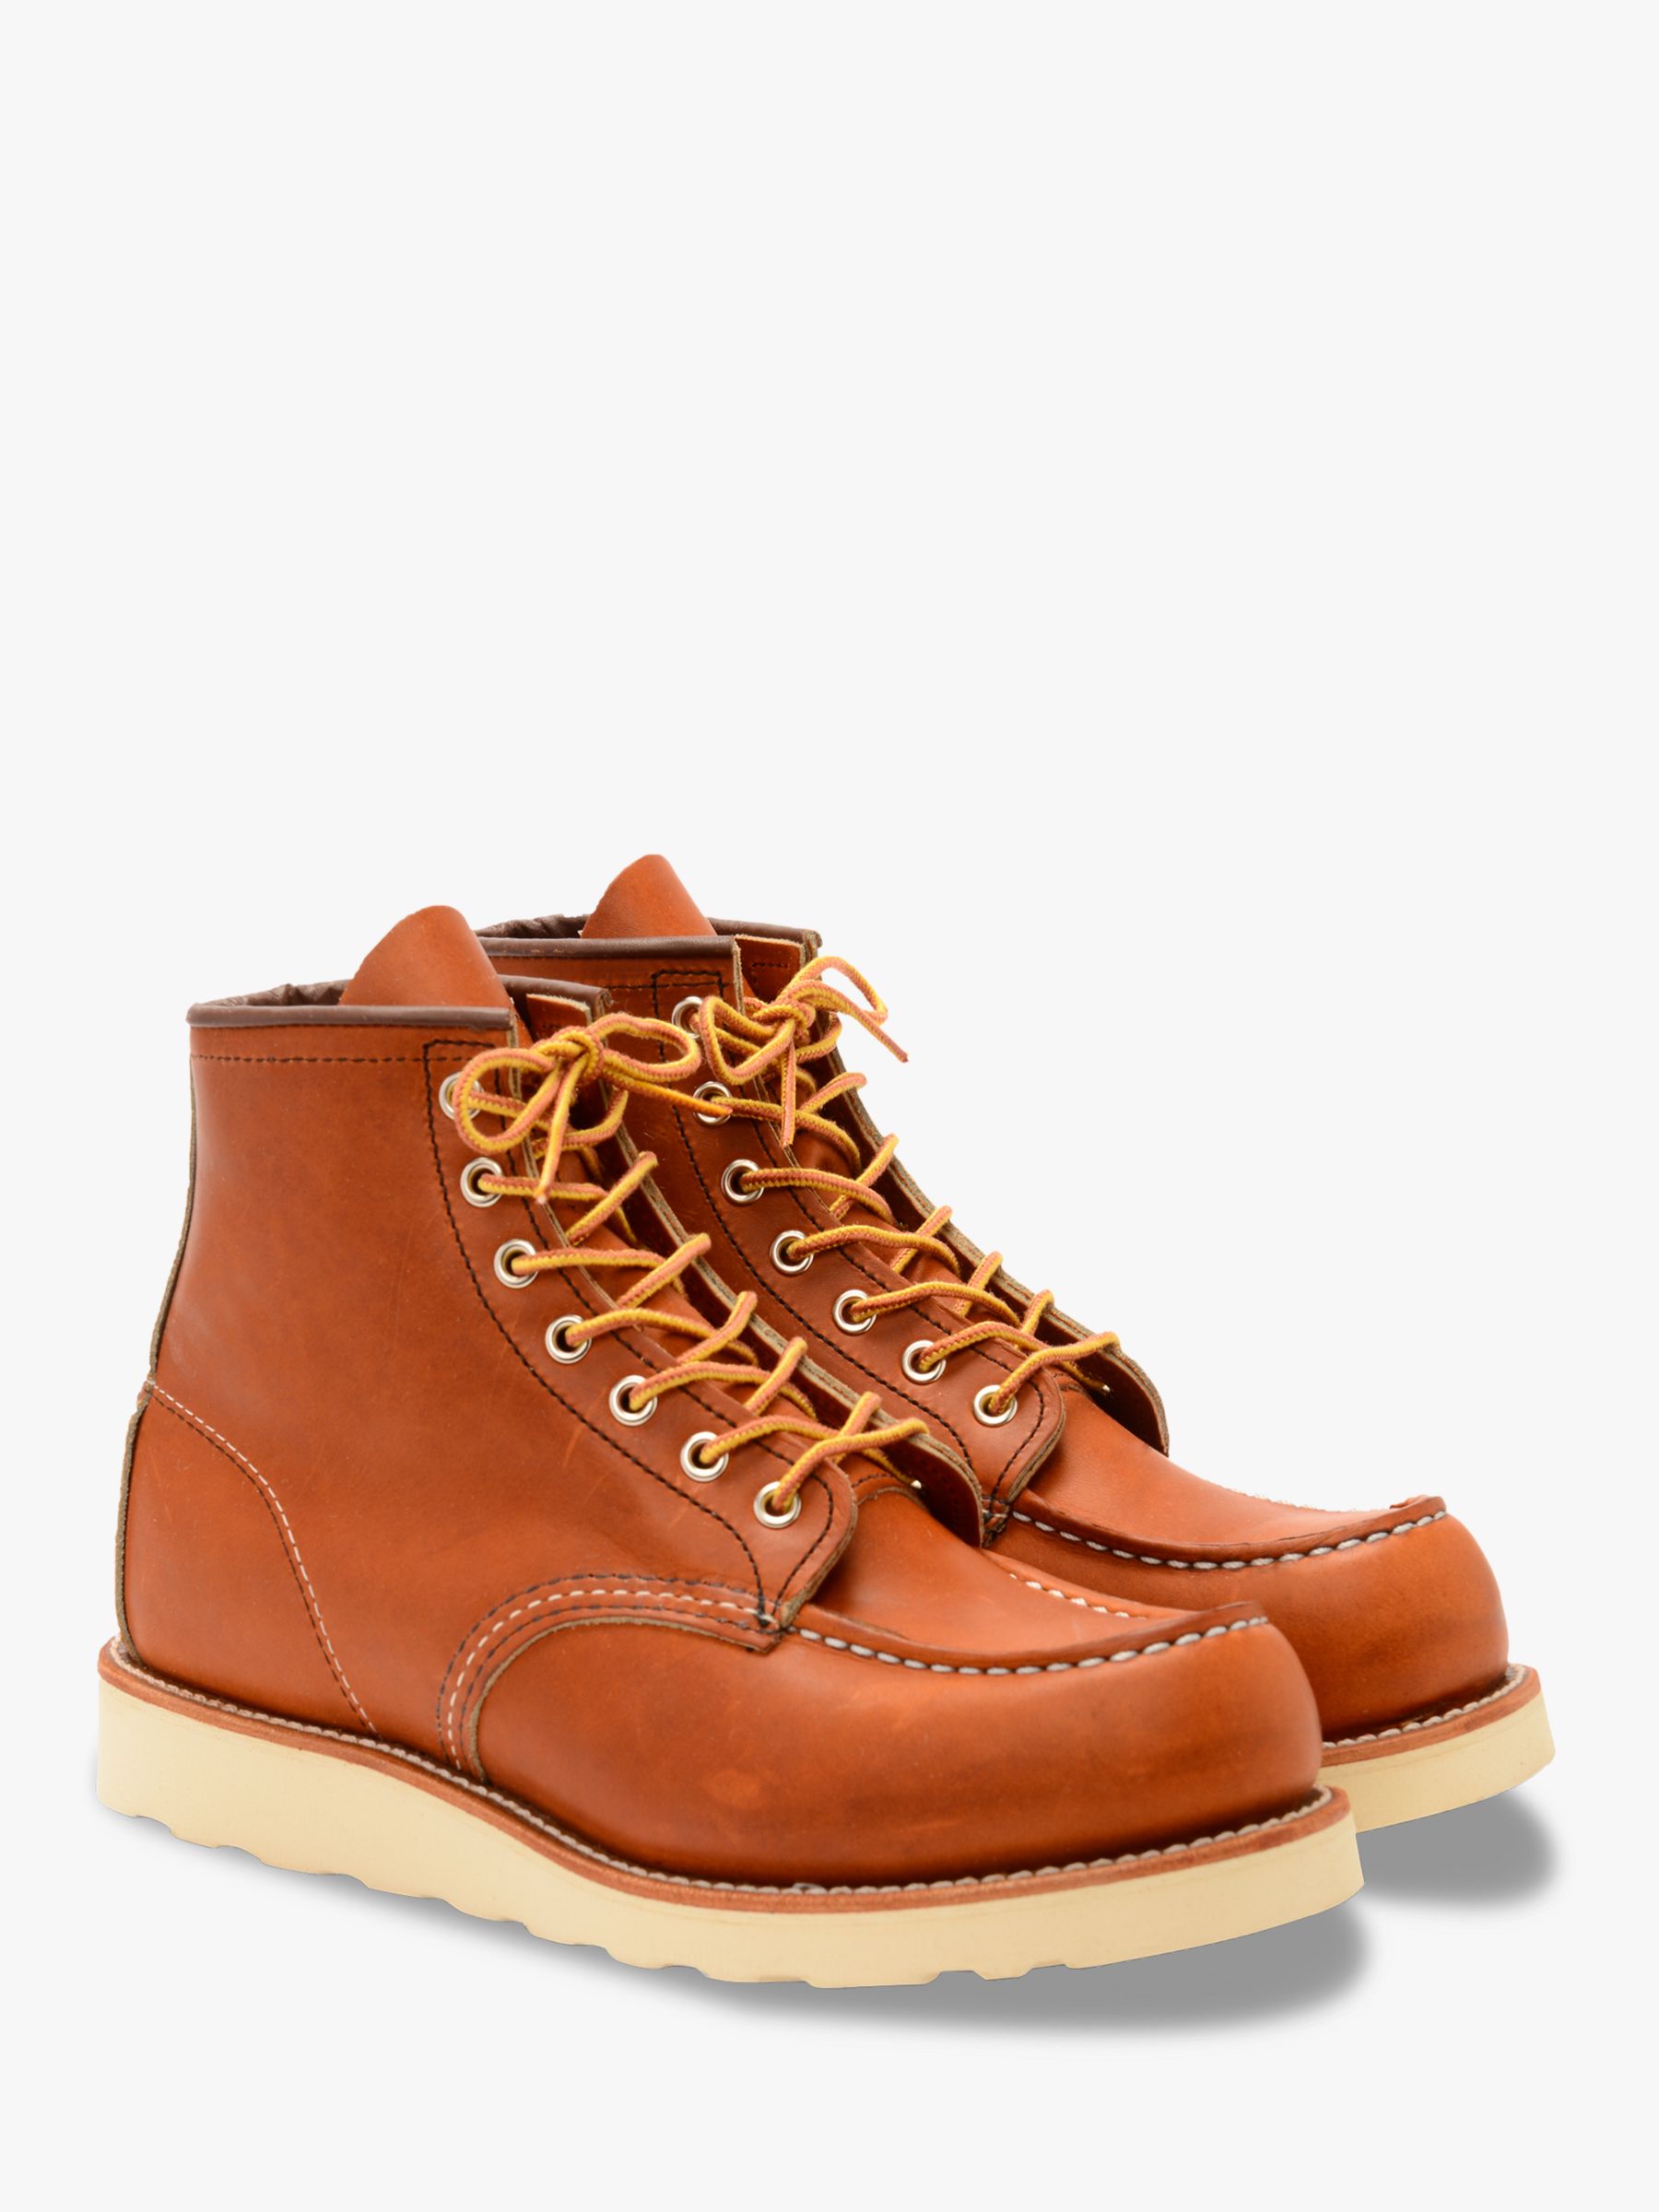 red wing moc toe oro legacy